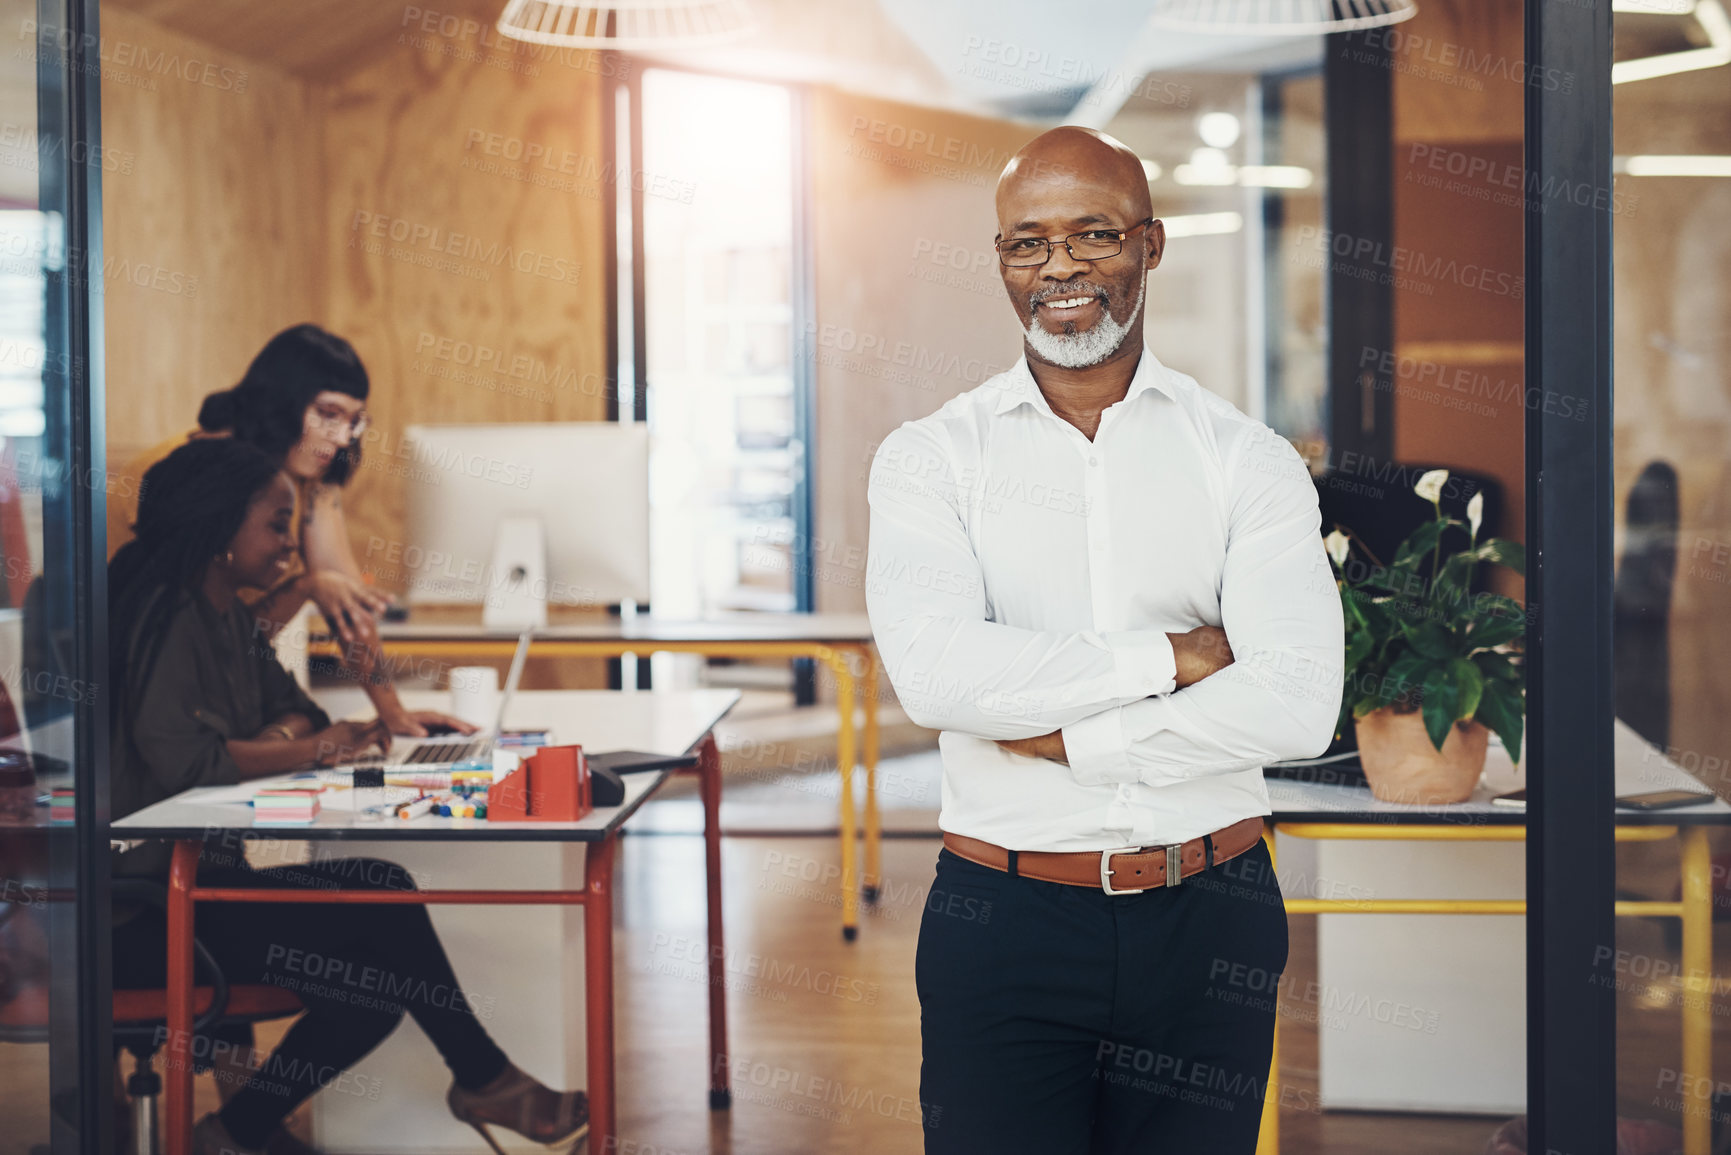 Buy stock photo Portrait of a mature businessman standing with his arms crossed in an office